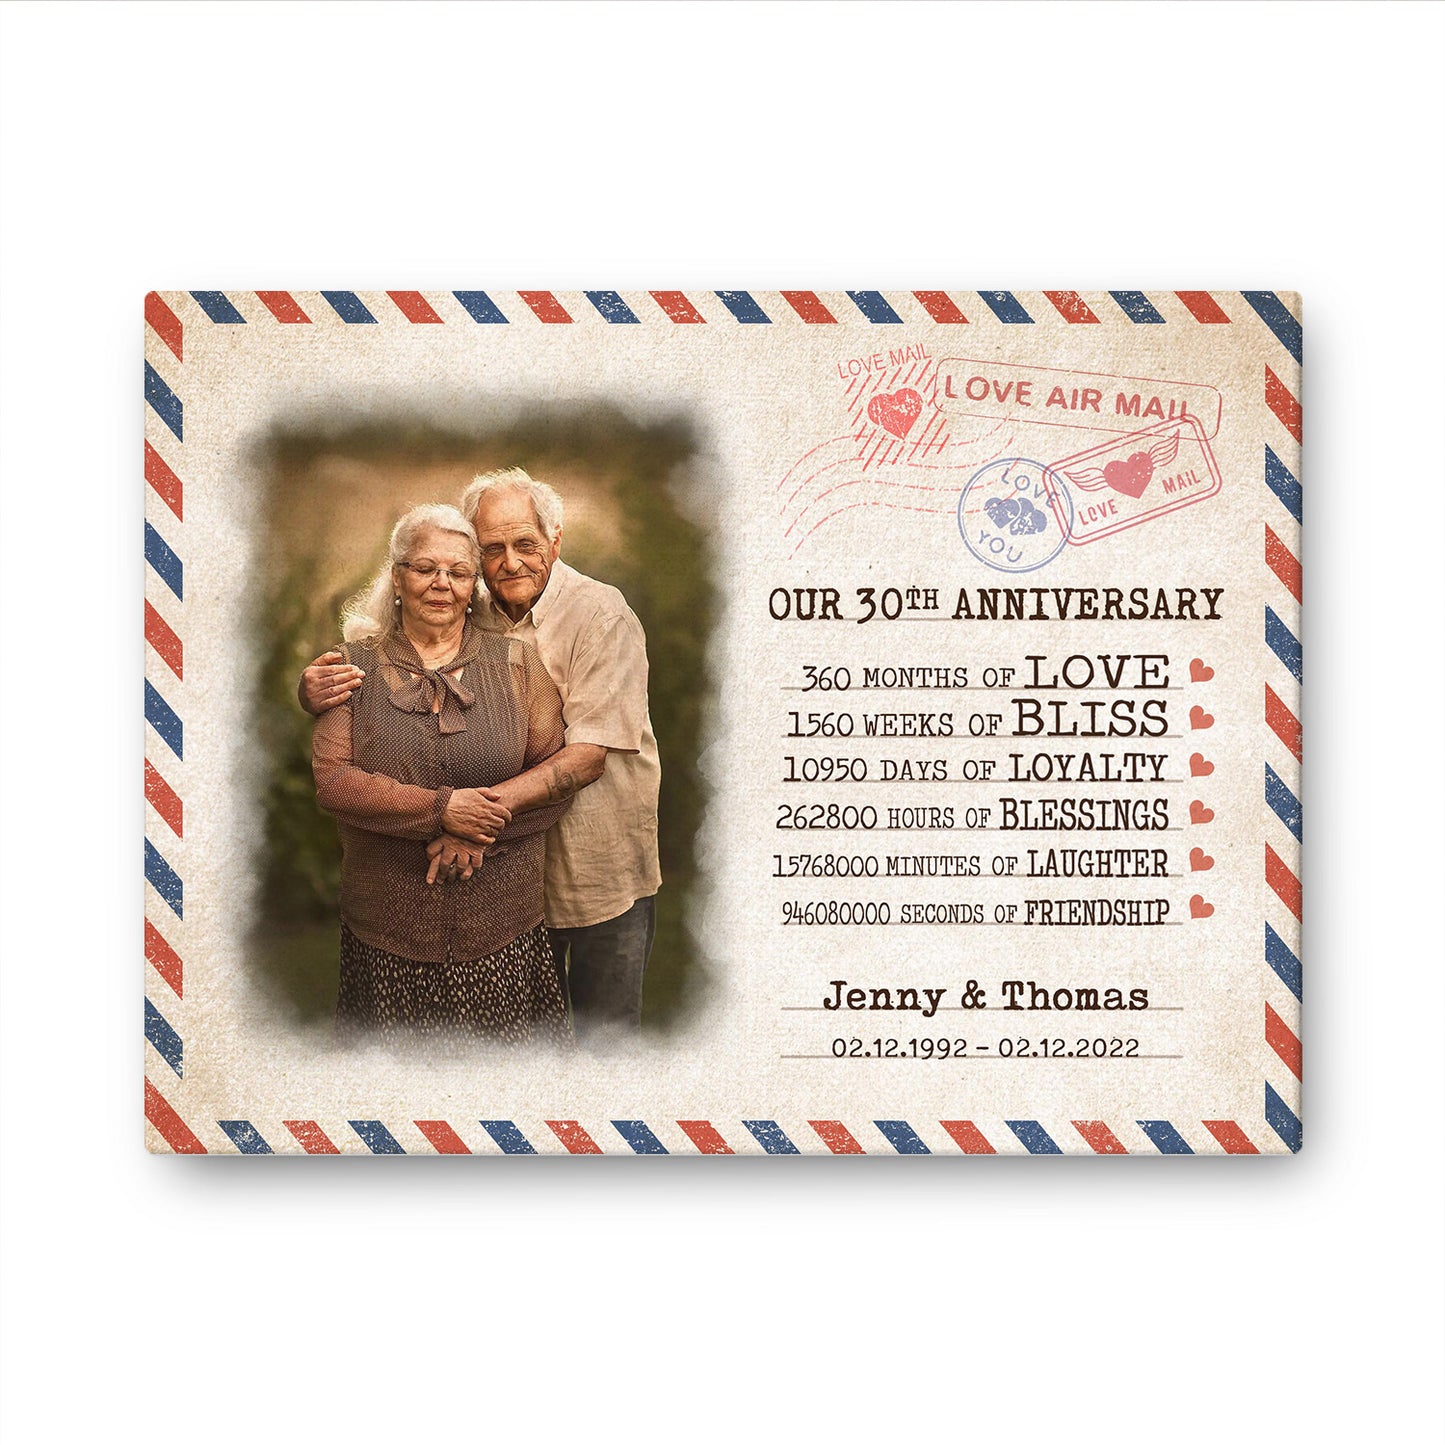 Our 30th Anniversary Letter Valentine Gift Personalized Canvas